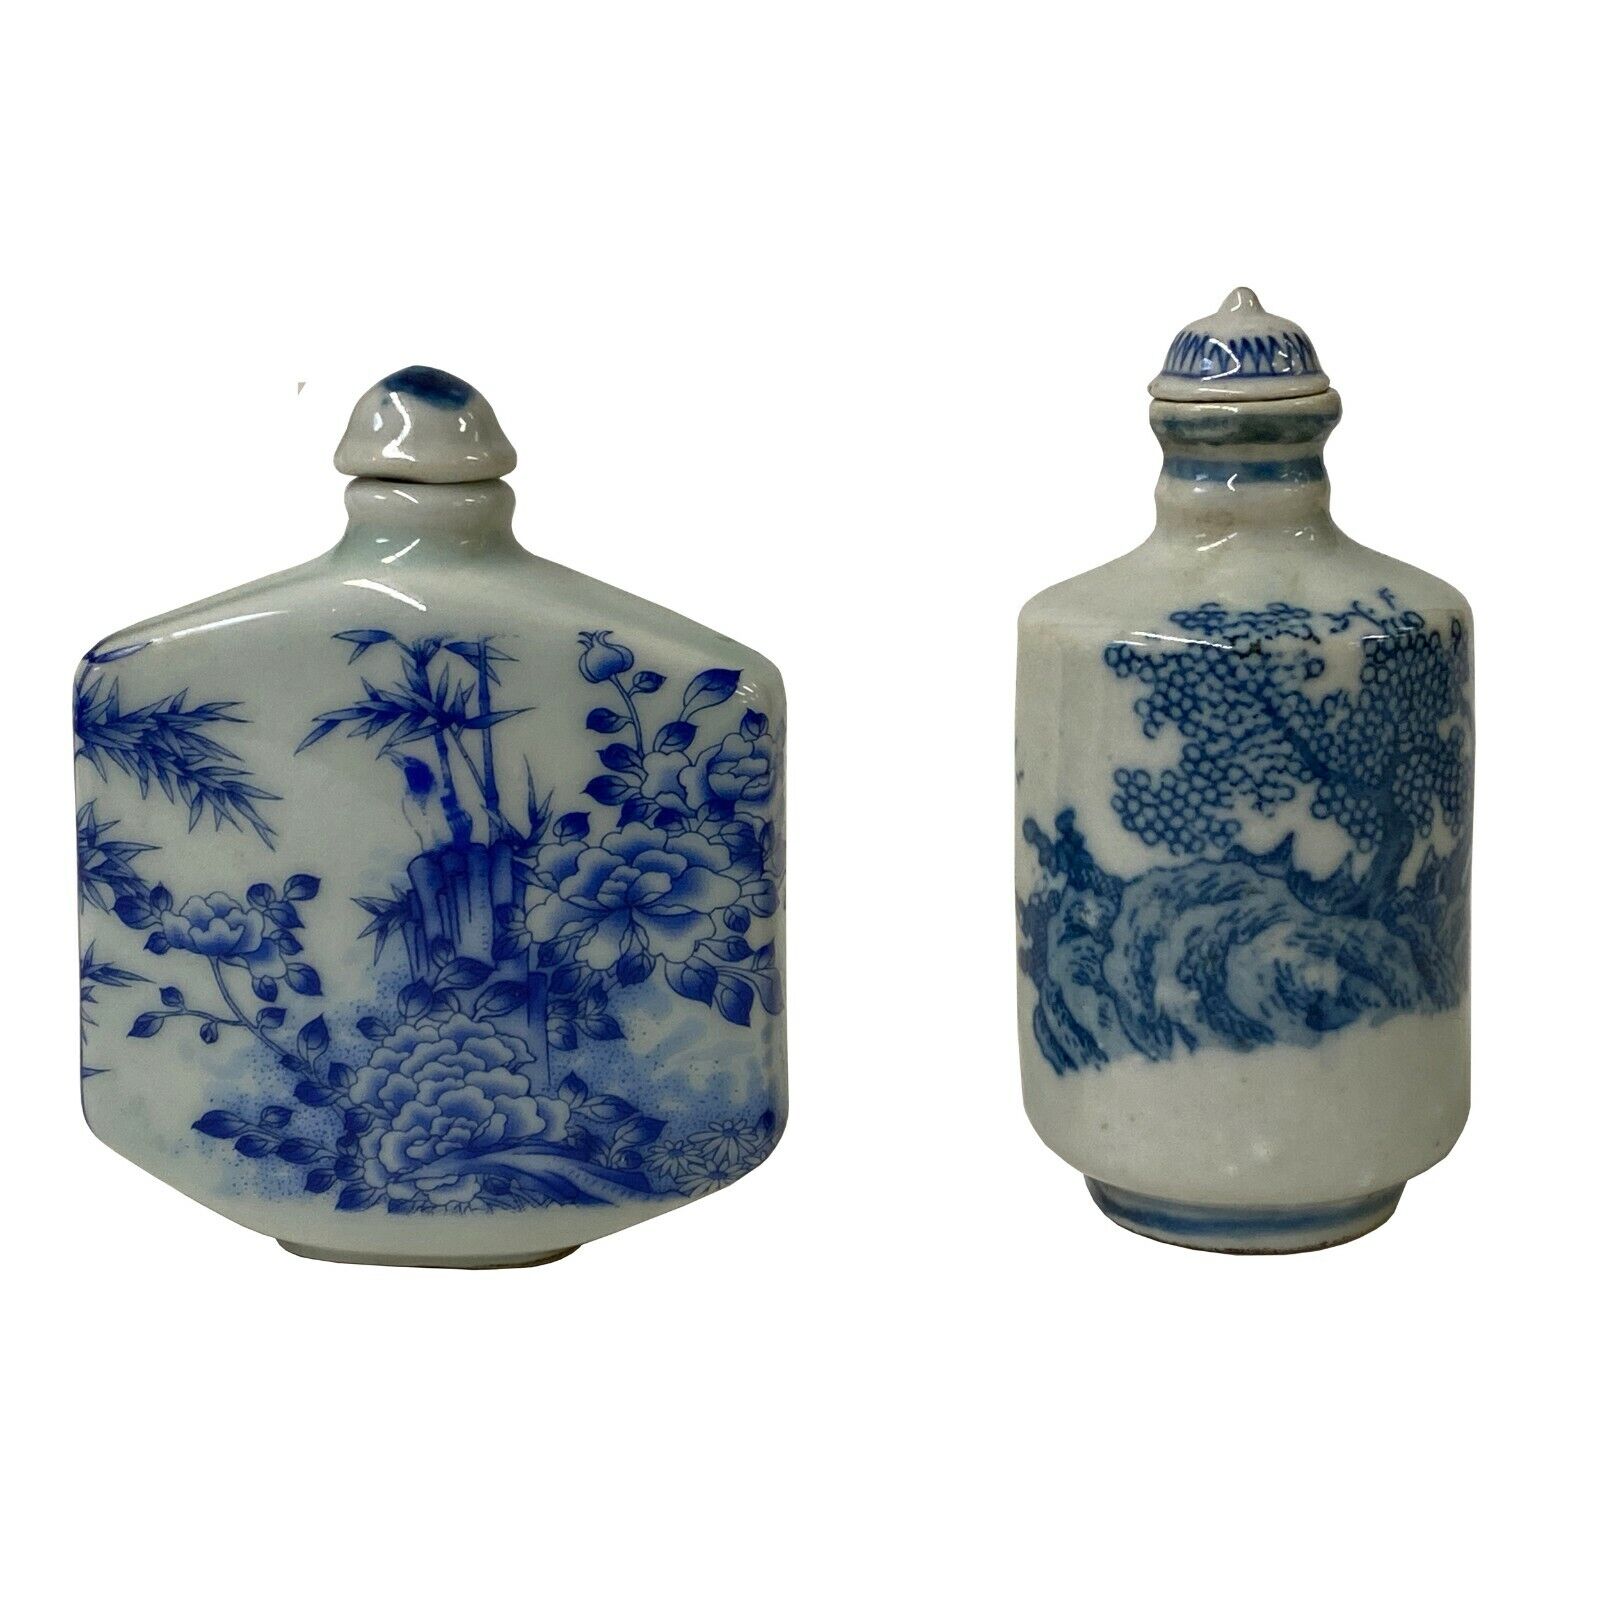 2 x Chinese Porcelain Snuff Bottle With Blue White Scenery Graphic ws1241